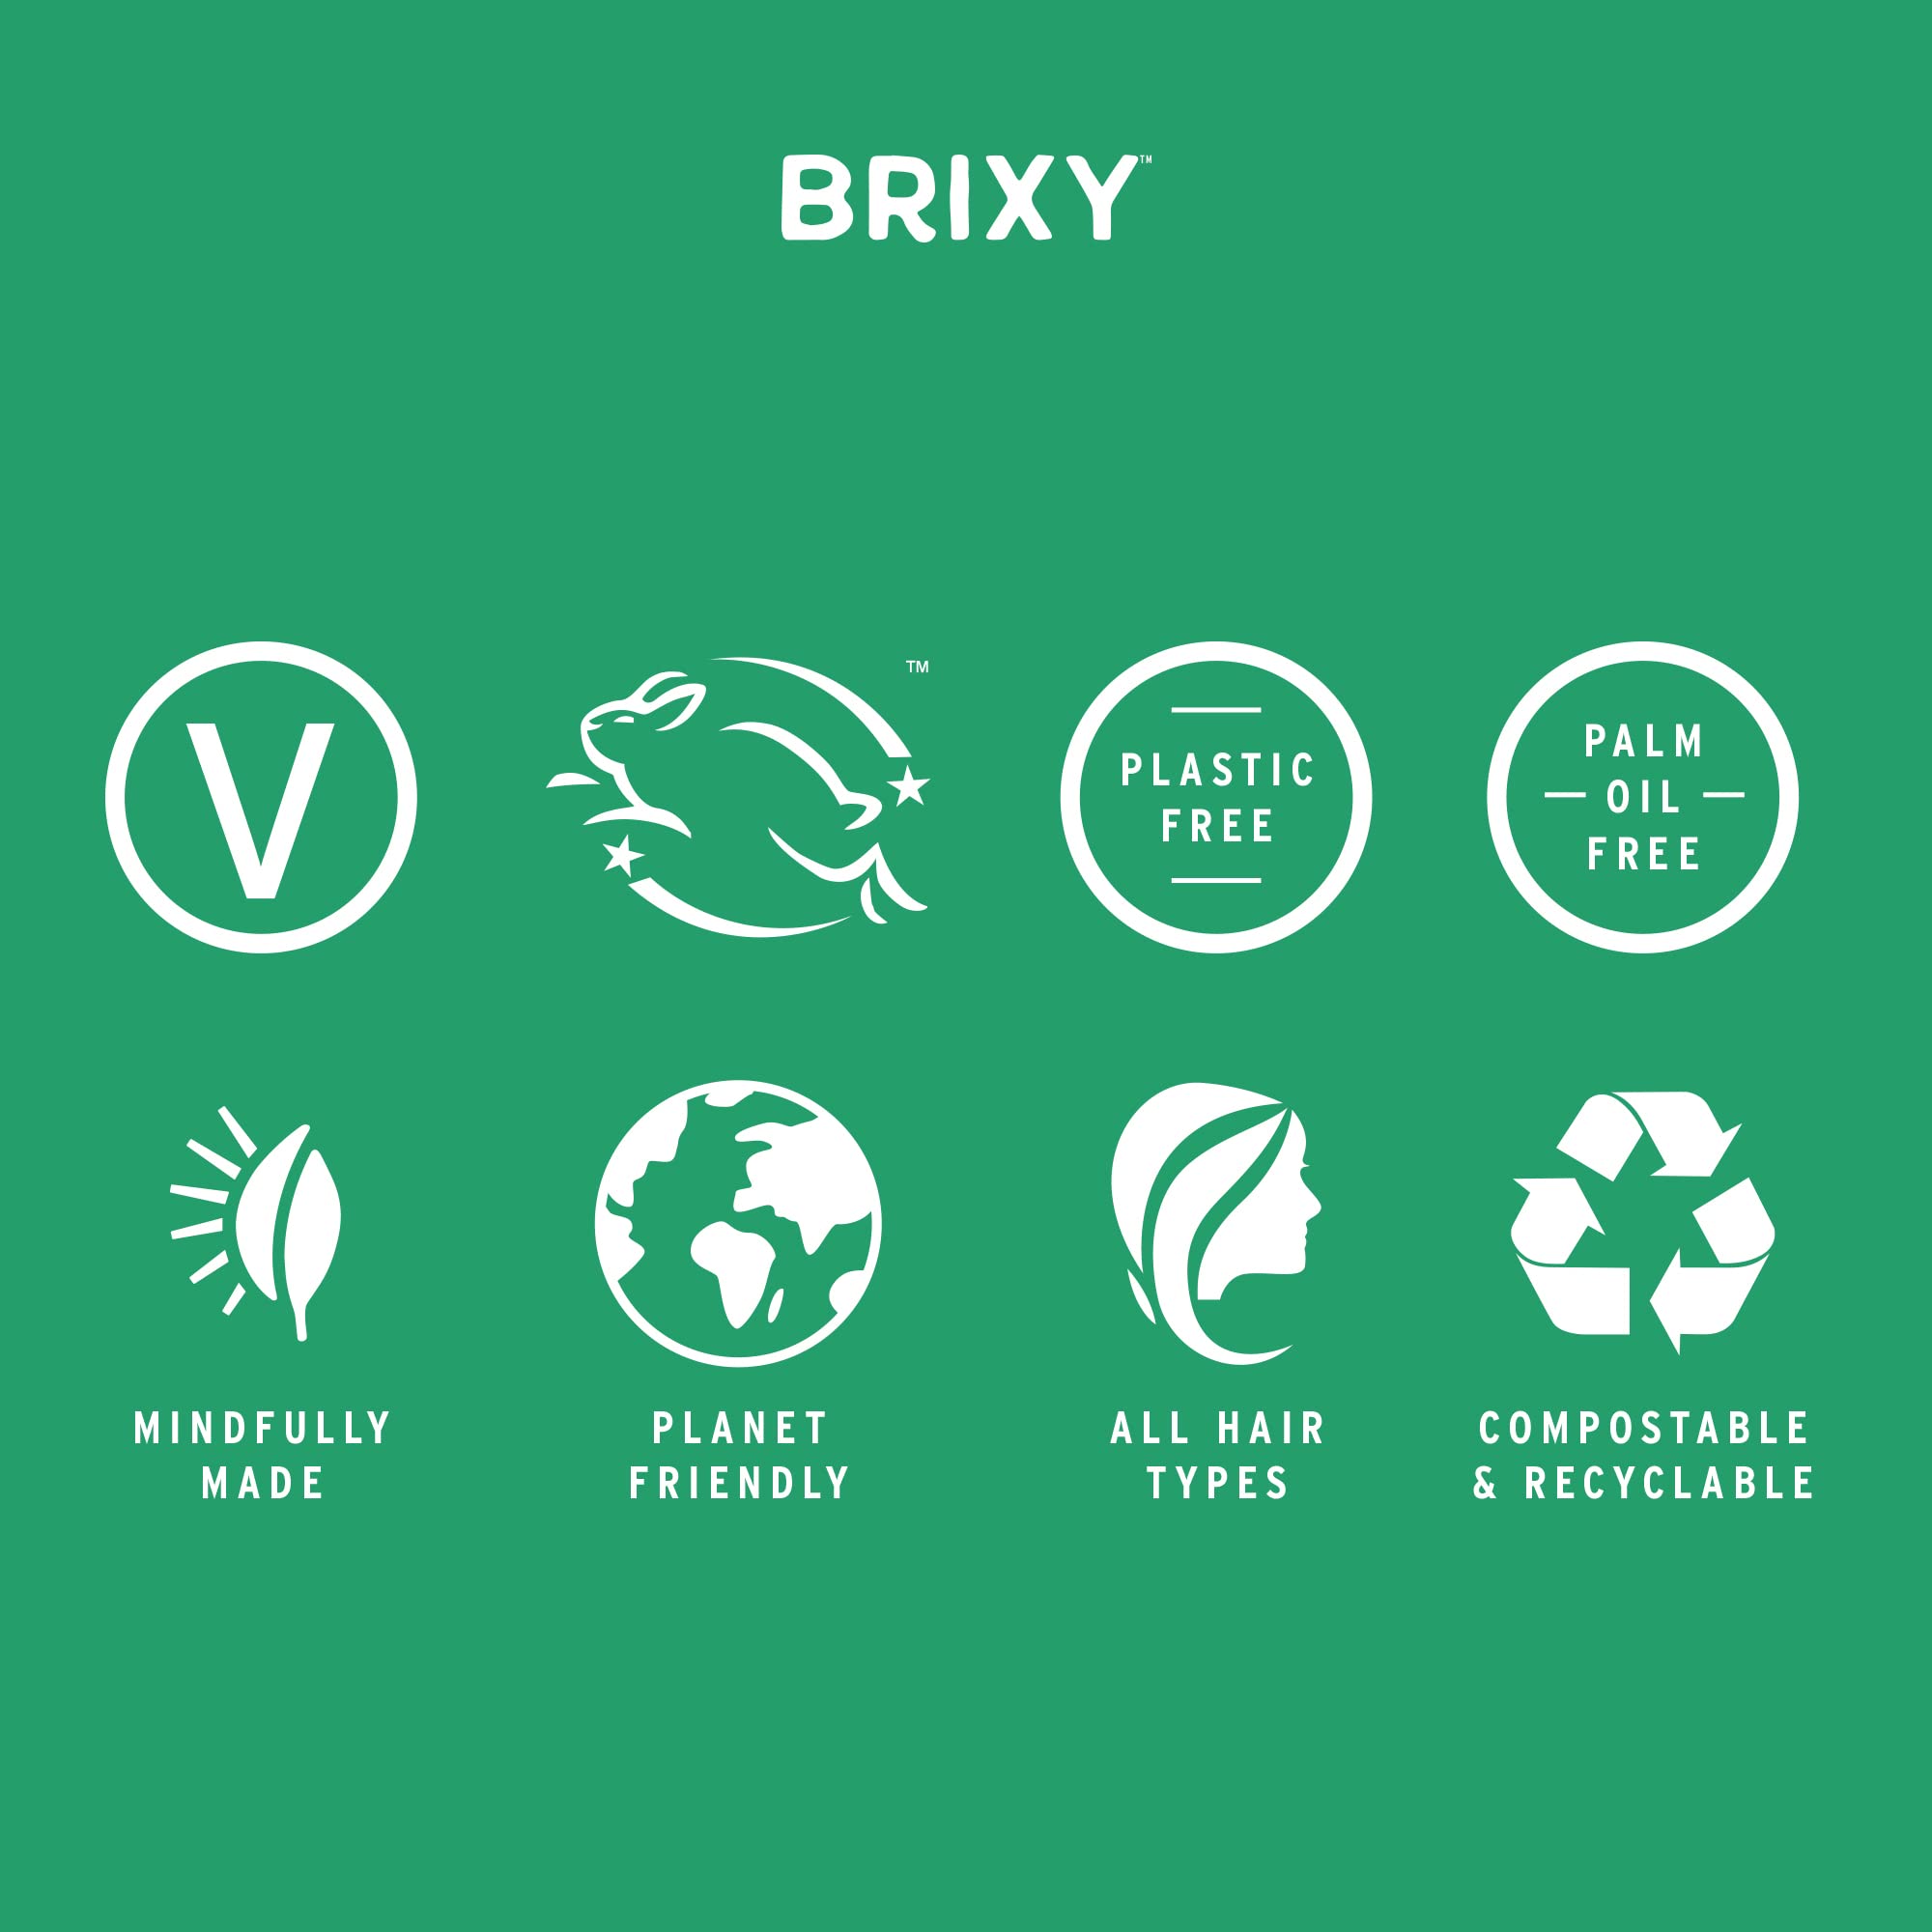 BRIXY Shampoo Bar for Balance & Hydration, All Hair Types, pH Balanced & Safe for Color Treated Hair, Sustainable, Vegan, Plastic Free (pack of 1, 4oz bar)